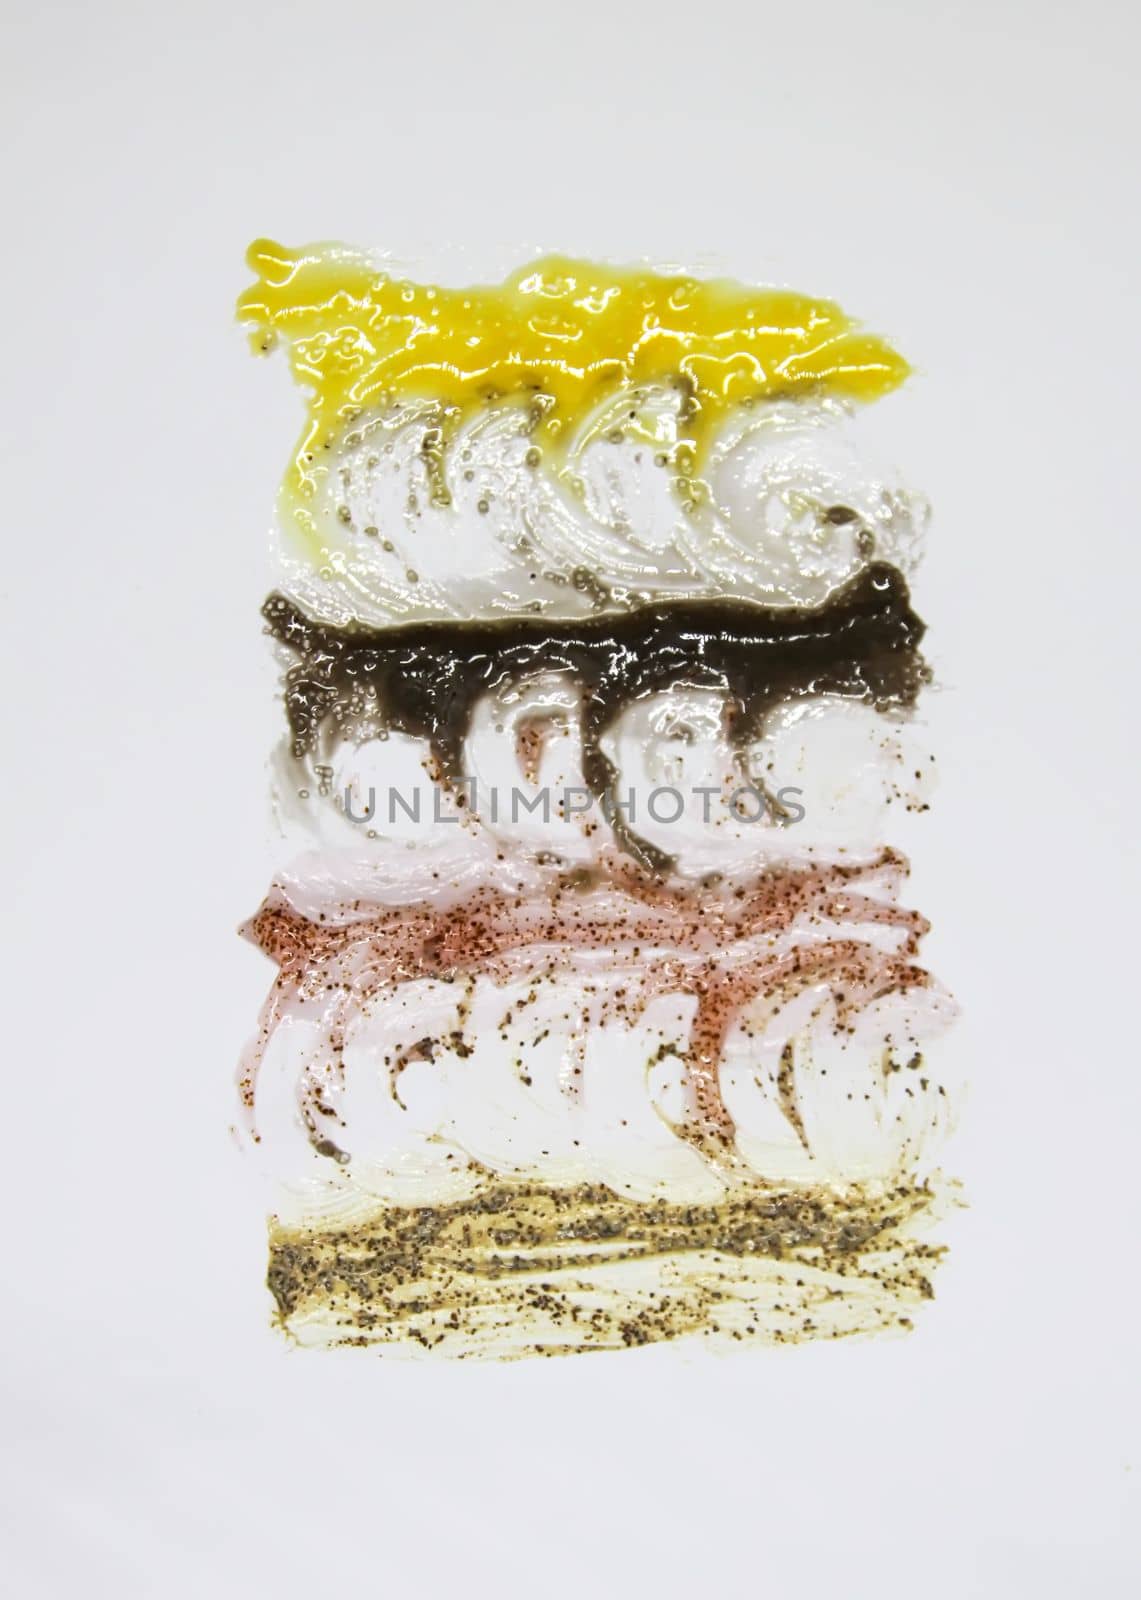 Body scrub textures. Skin care product swatch smear on white background.